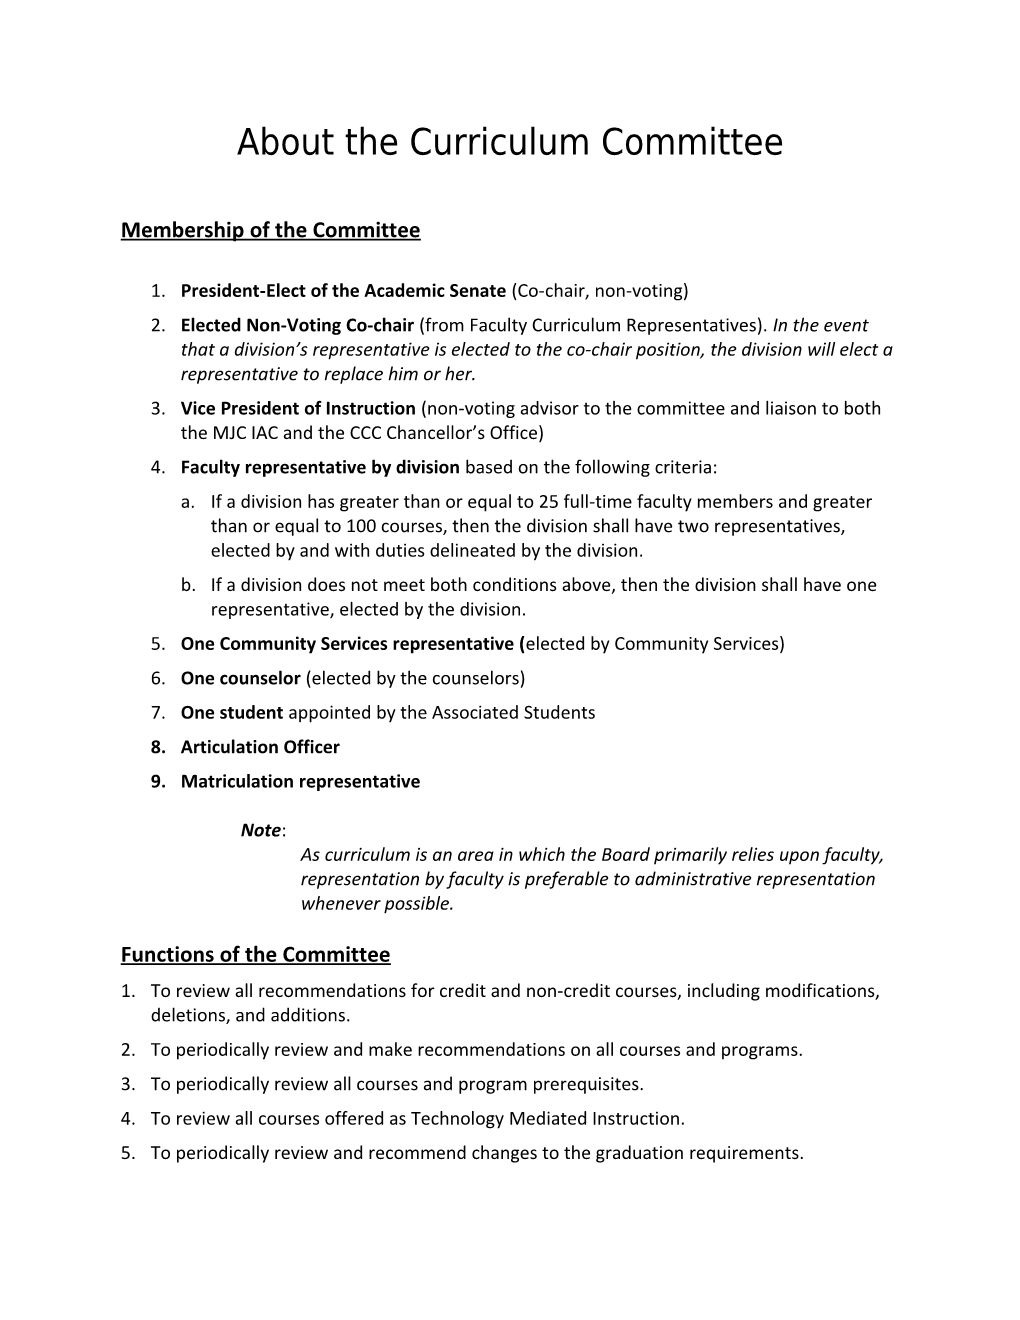 Composition of the Committee